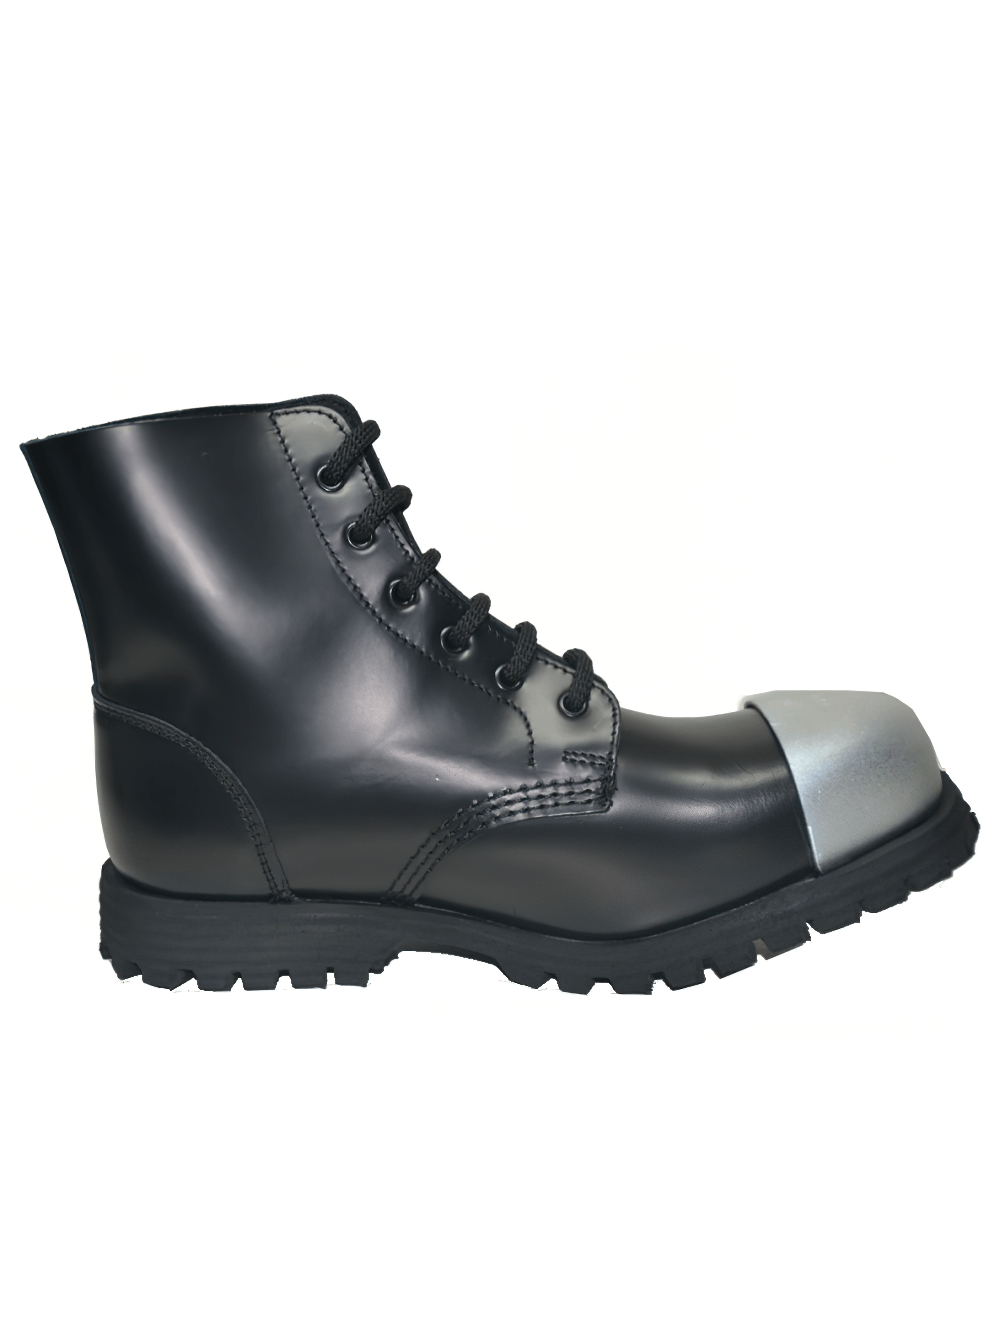 Rugged Black 6 Eyelet Lace-Up Ranger Boots with Steel Toe